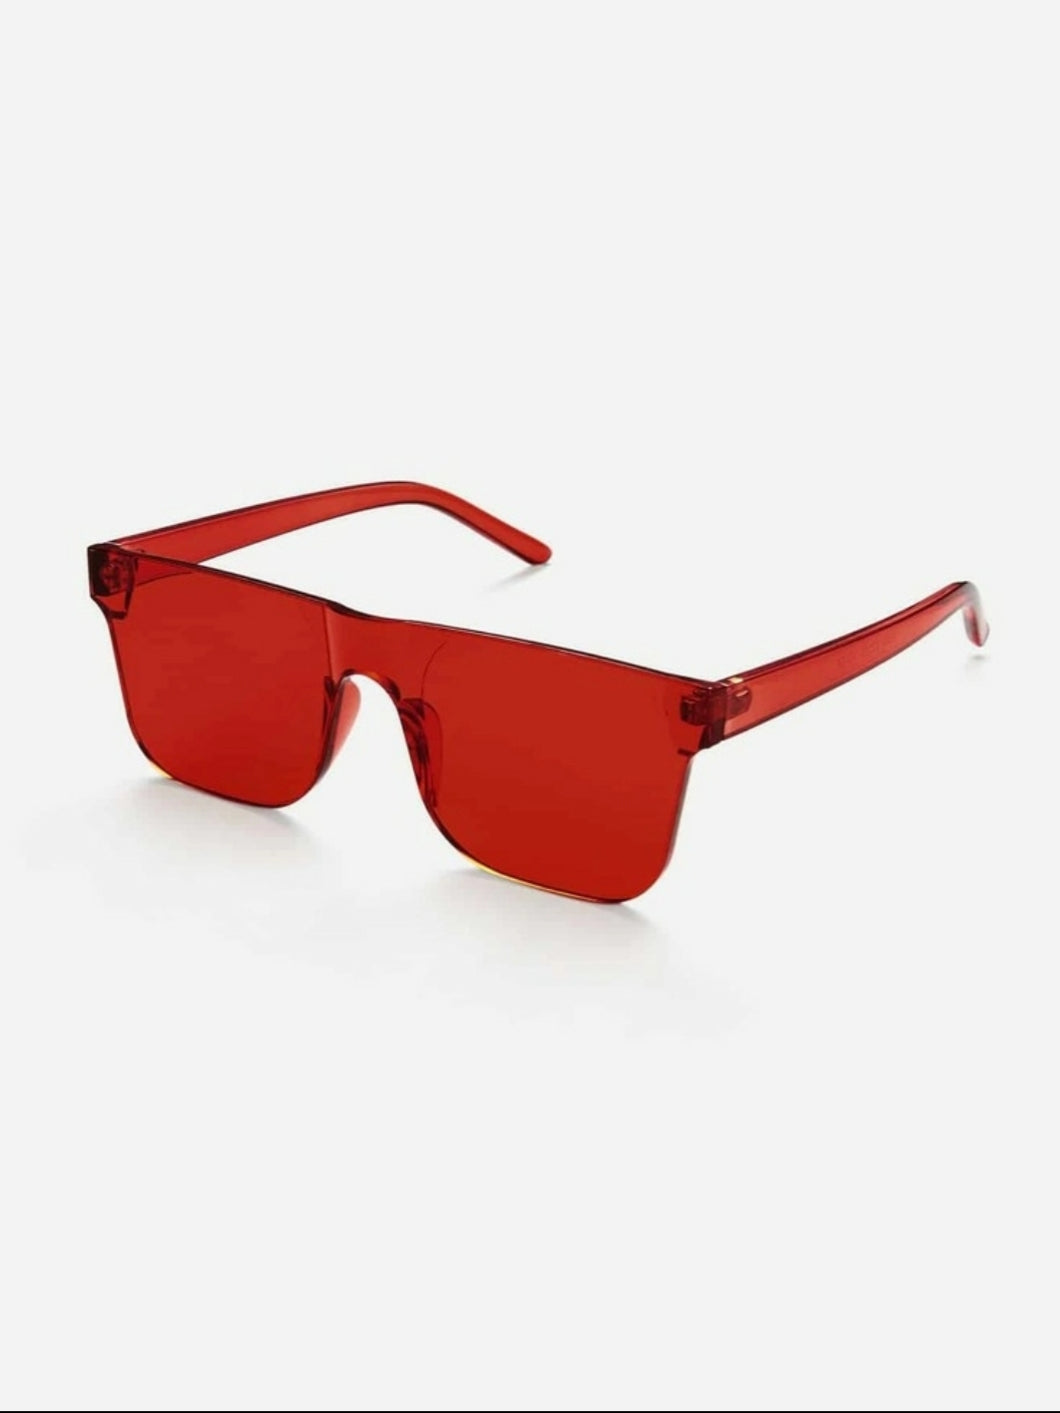 See Red | Sunglasses